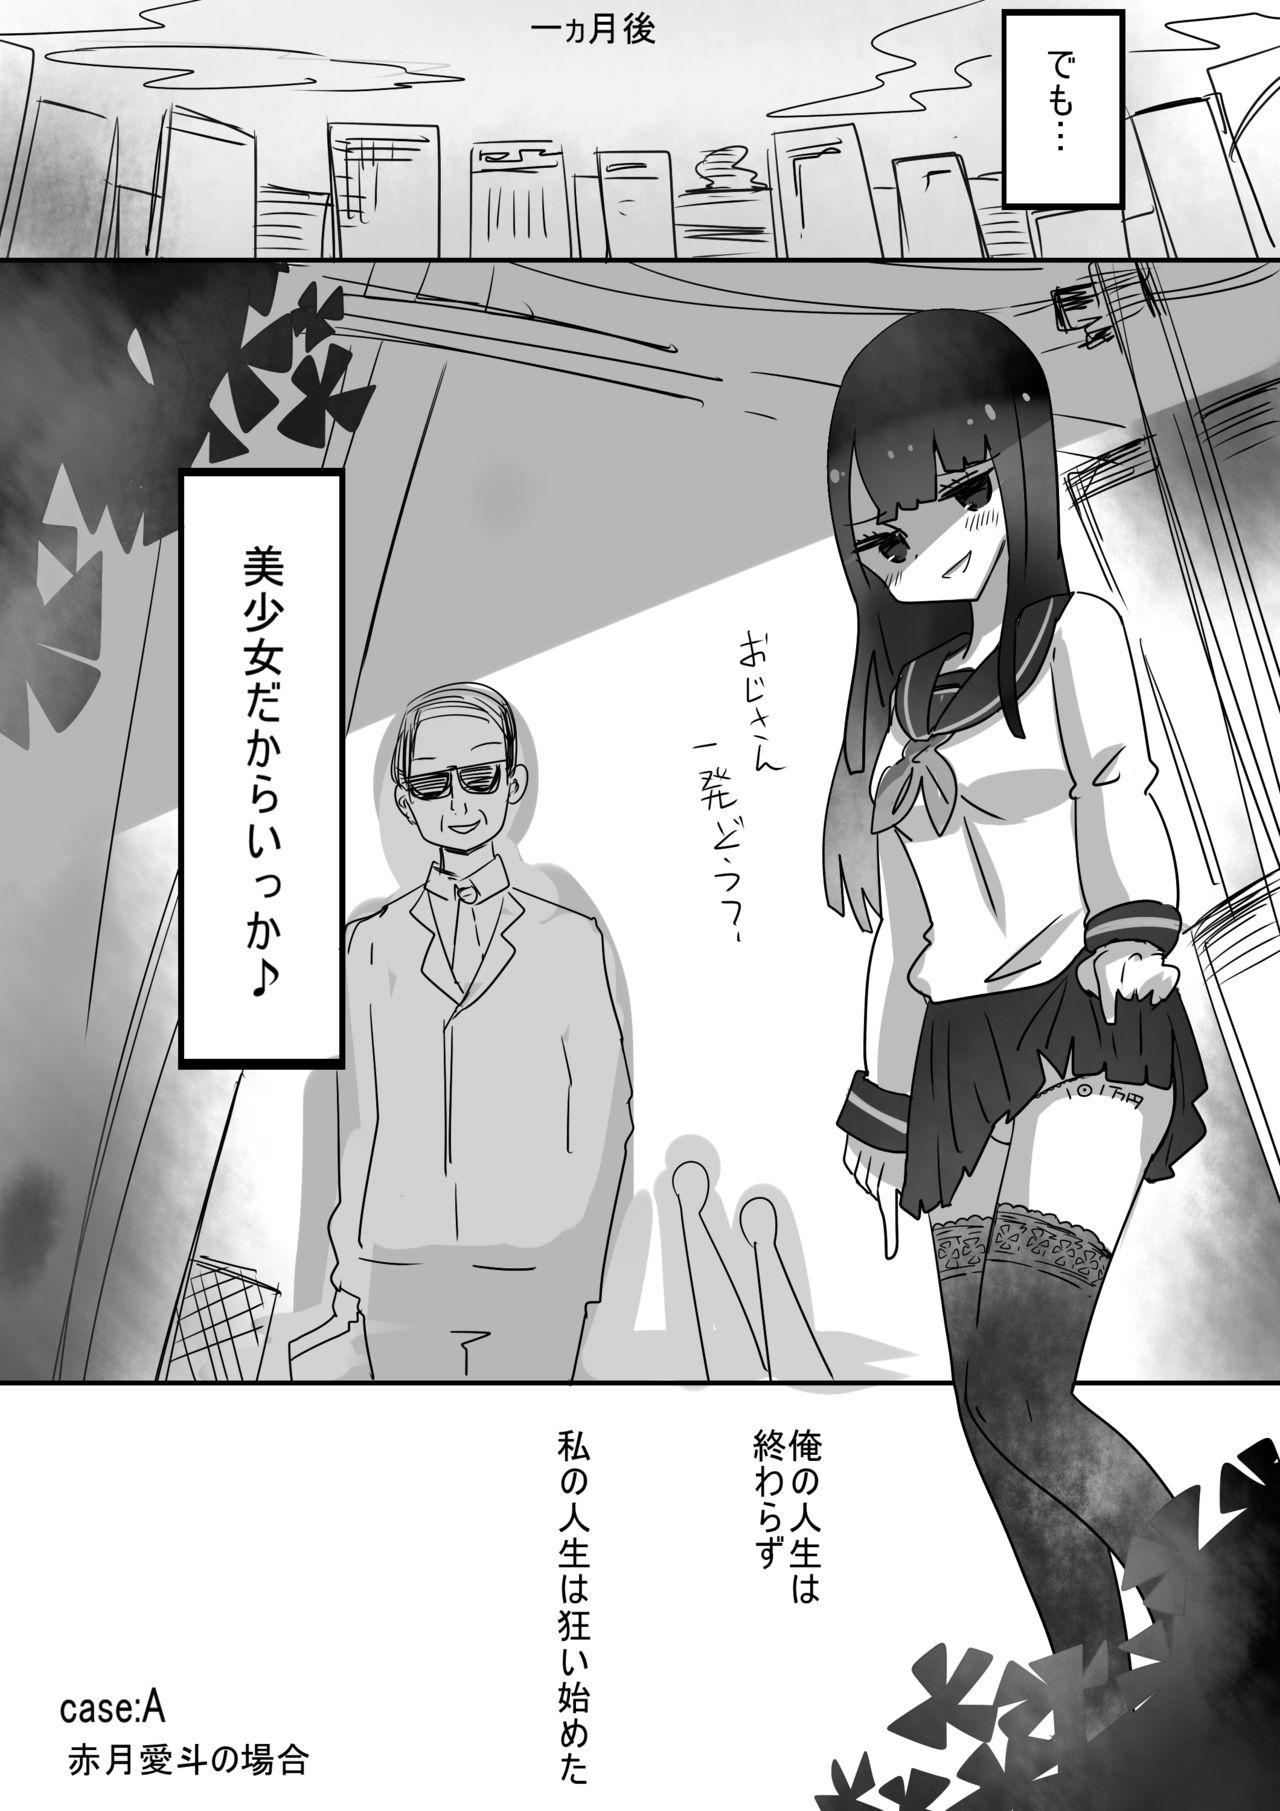 Trans Effect Sex Alice case:A Page 25 Of 26 hentai haven, Trans Effect Sex ...